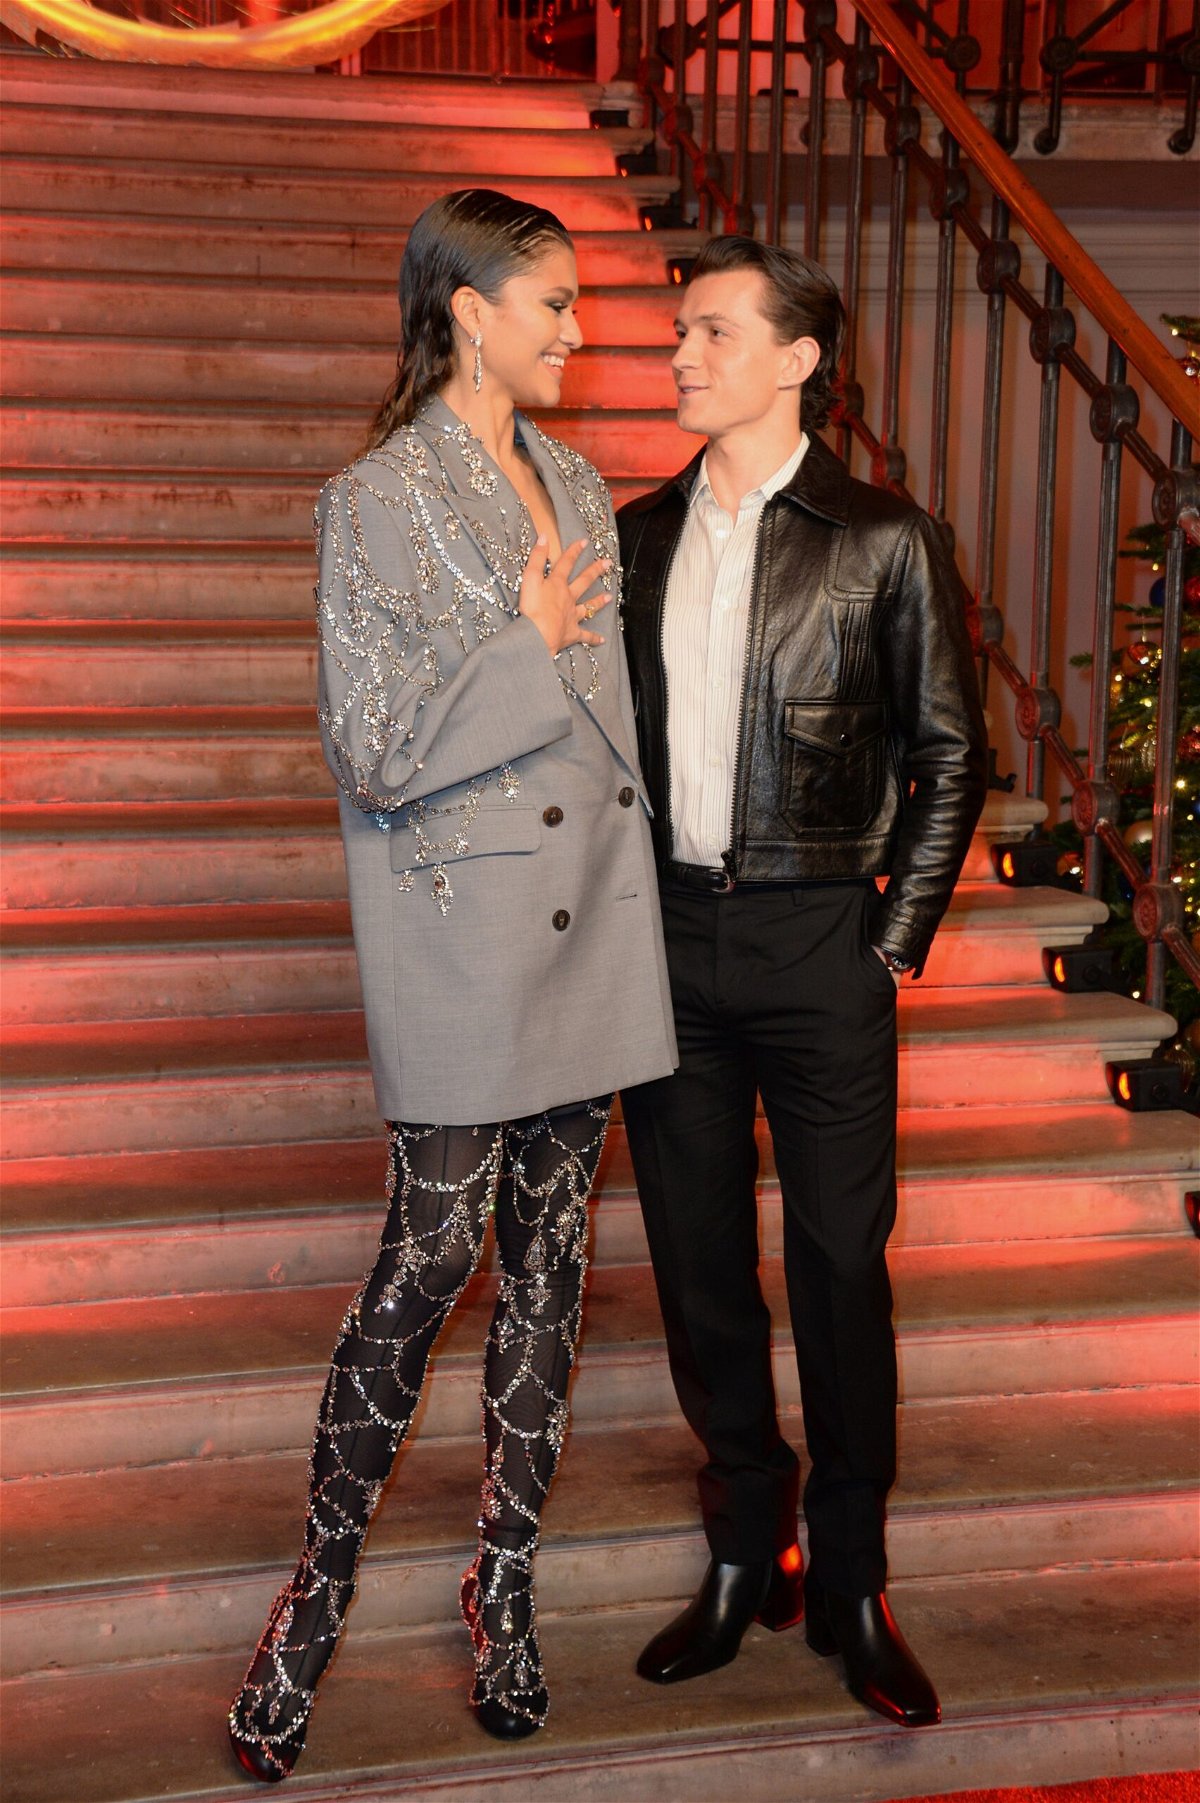 <i>David M. Benett/WireImage/Getty Images</i><br/>(From left) Zendaya and Tom Holland are pictured here at a London photocall for 'Spider-Man: No Way Home' in 2021.